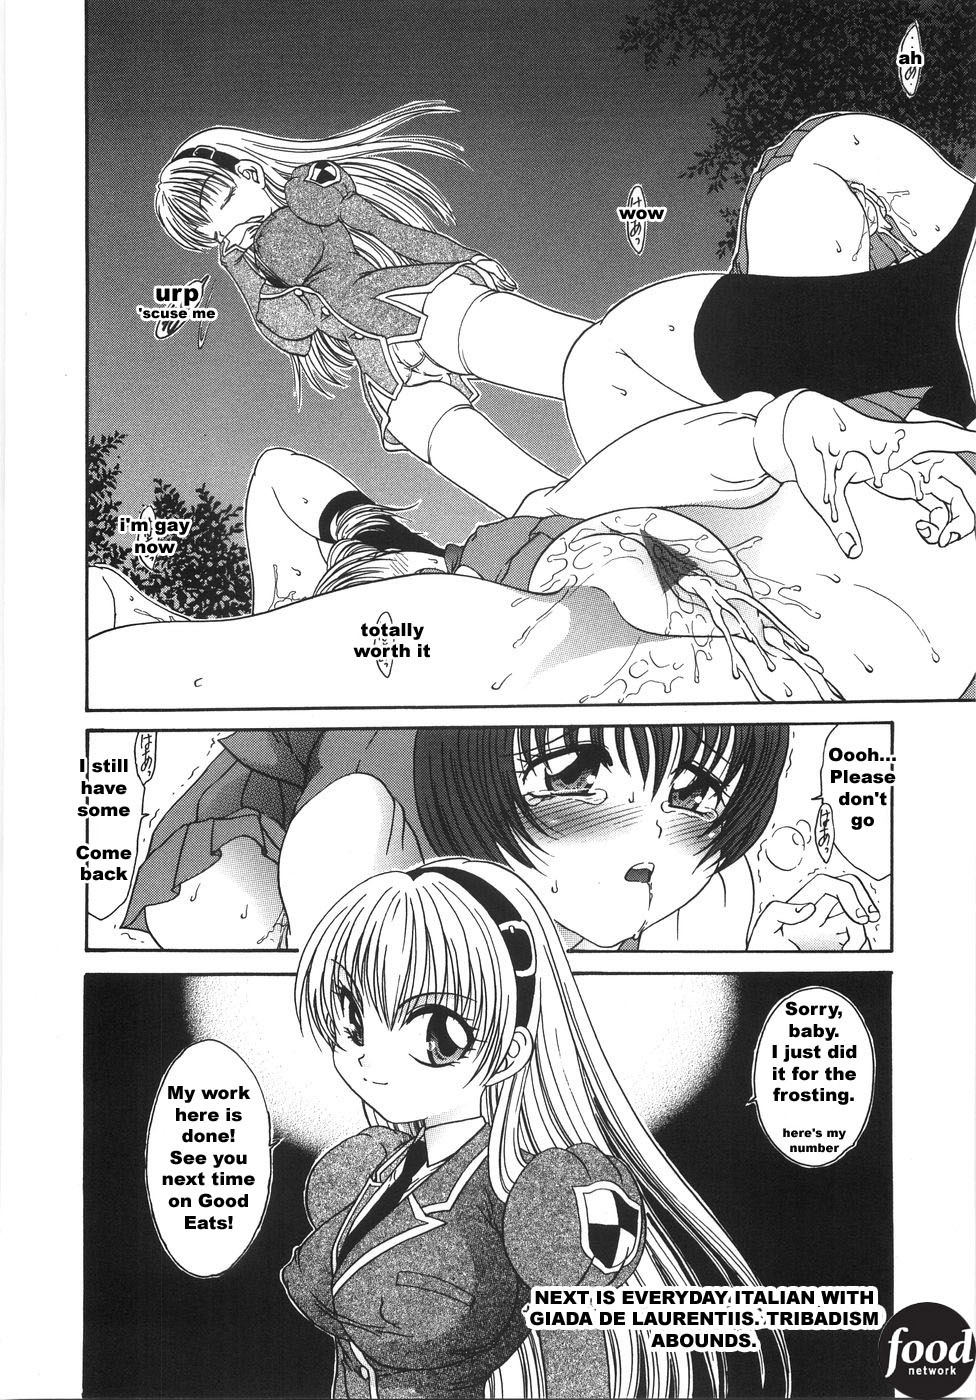 Food Network [English] [Rewrite] page 12 full